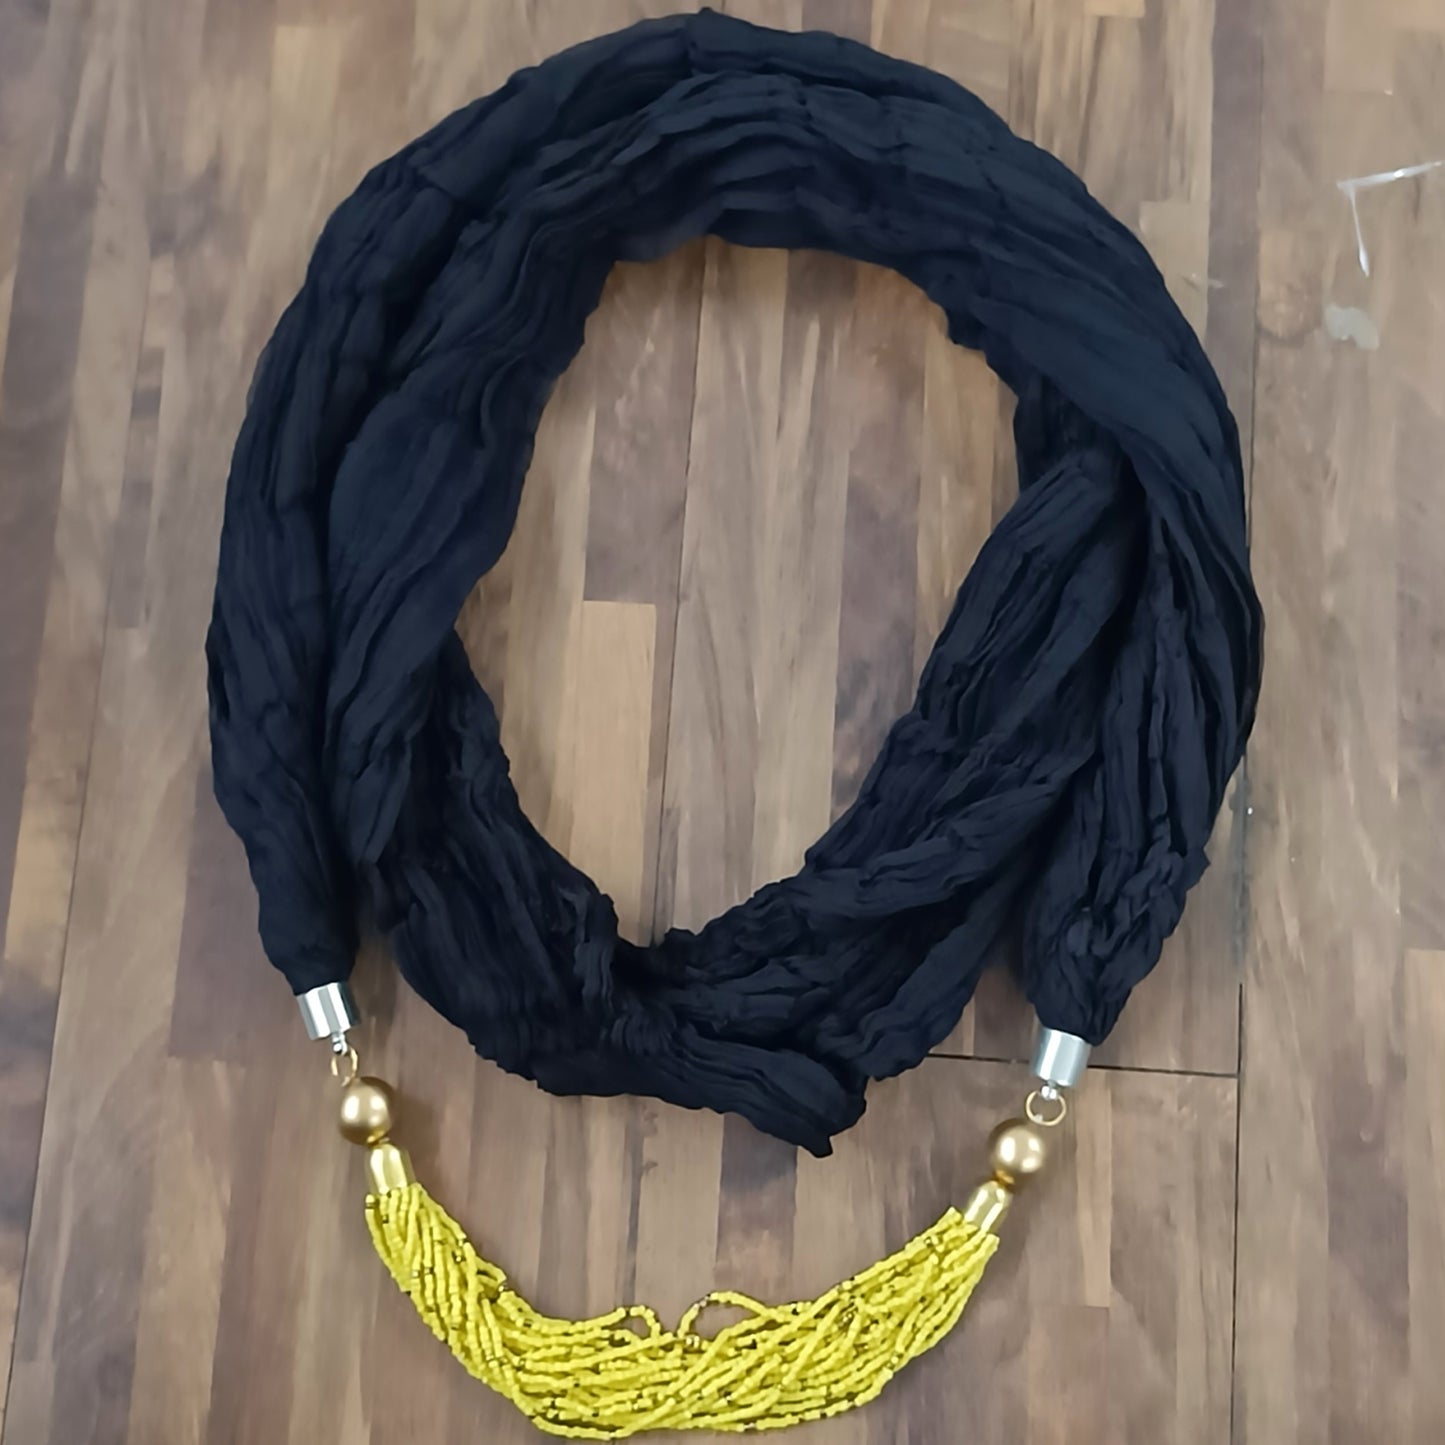 Bdiva Handmade Black Scarf With Yellow Colored Seed Beads Necklace.